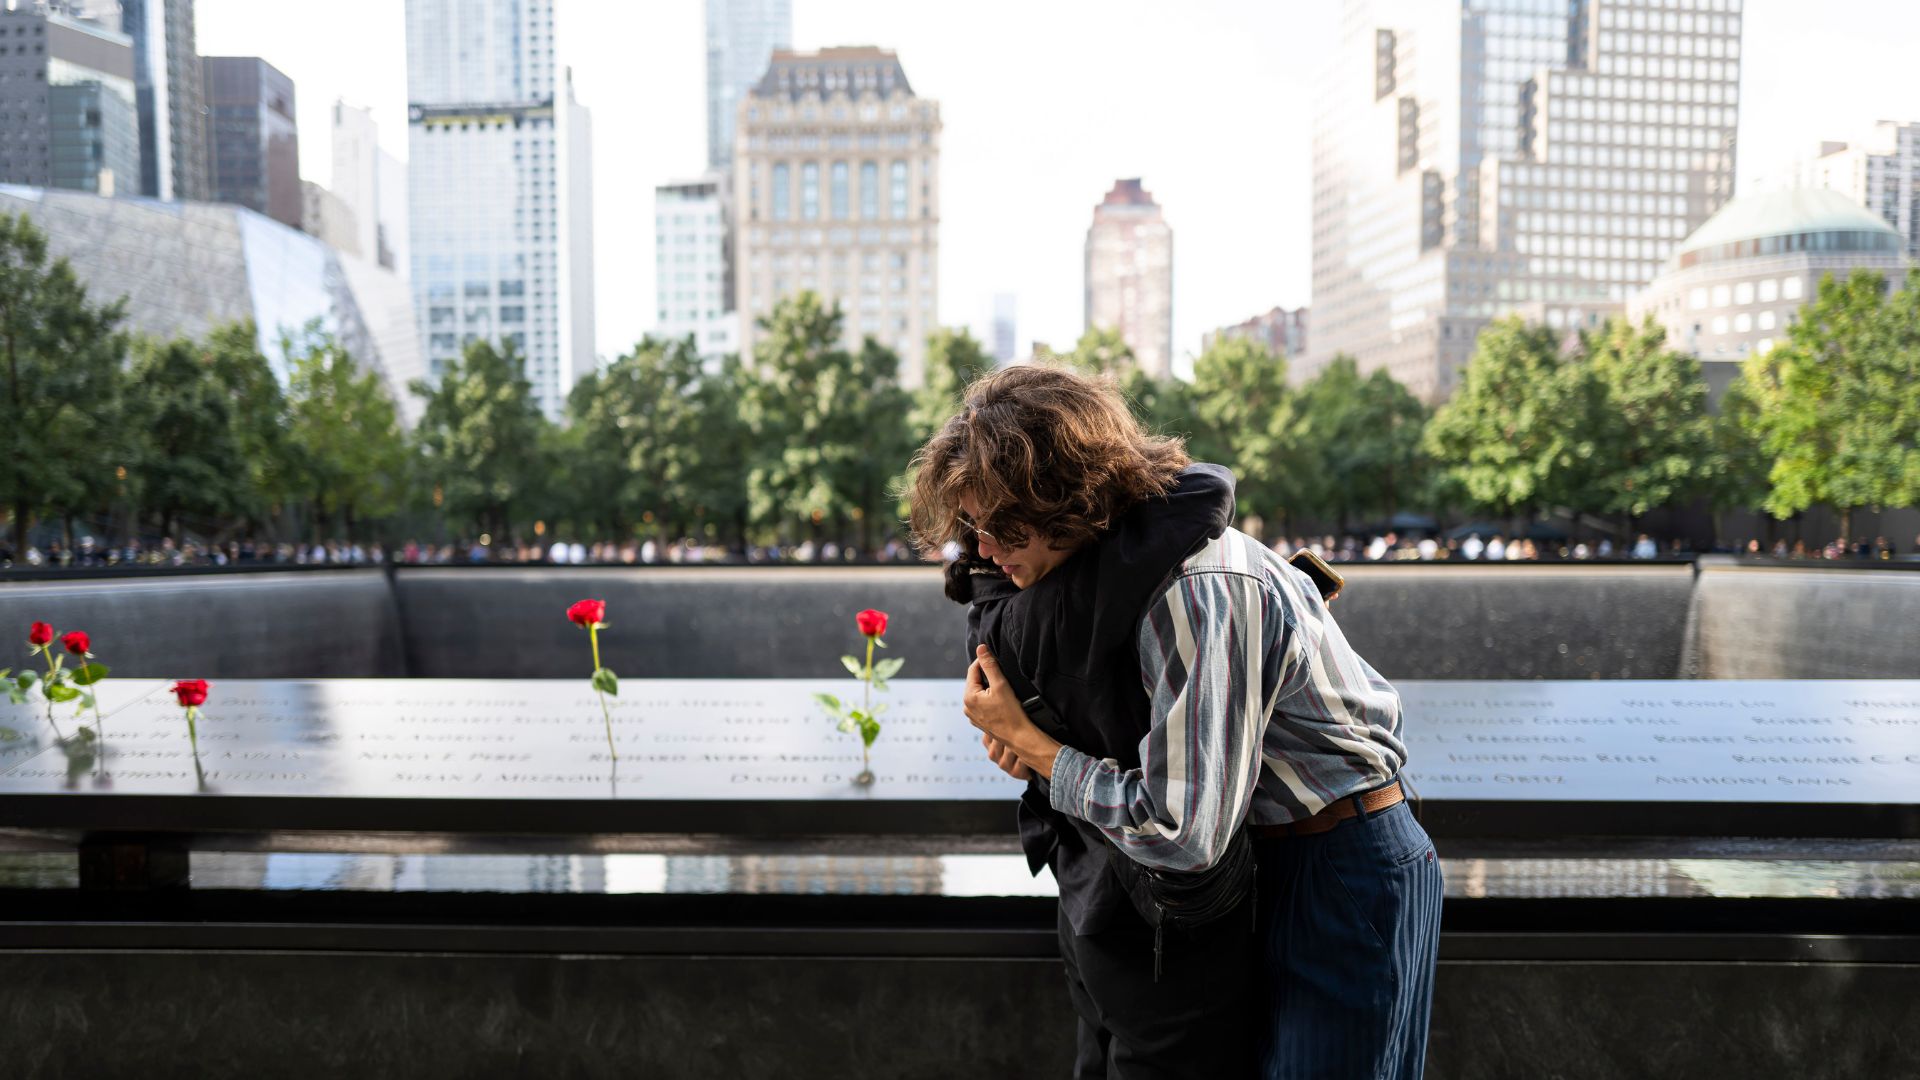 Two people hug in front of the 9/11 Memorial, where there are several roses placed at victims' names, with part of the Manhattan skyline in background